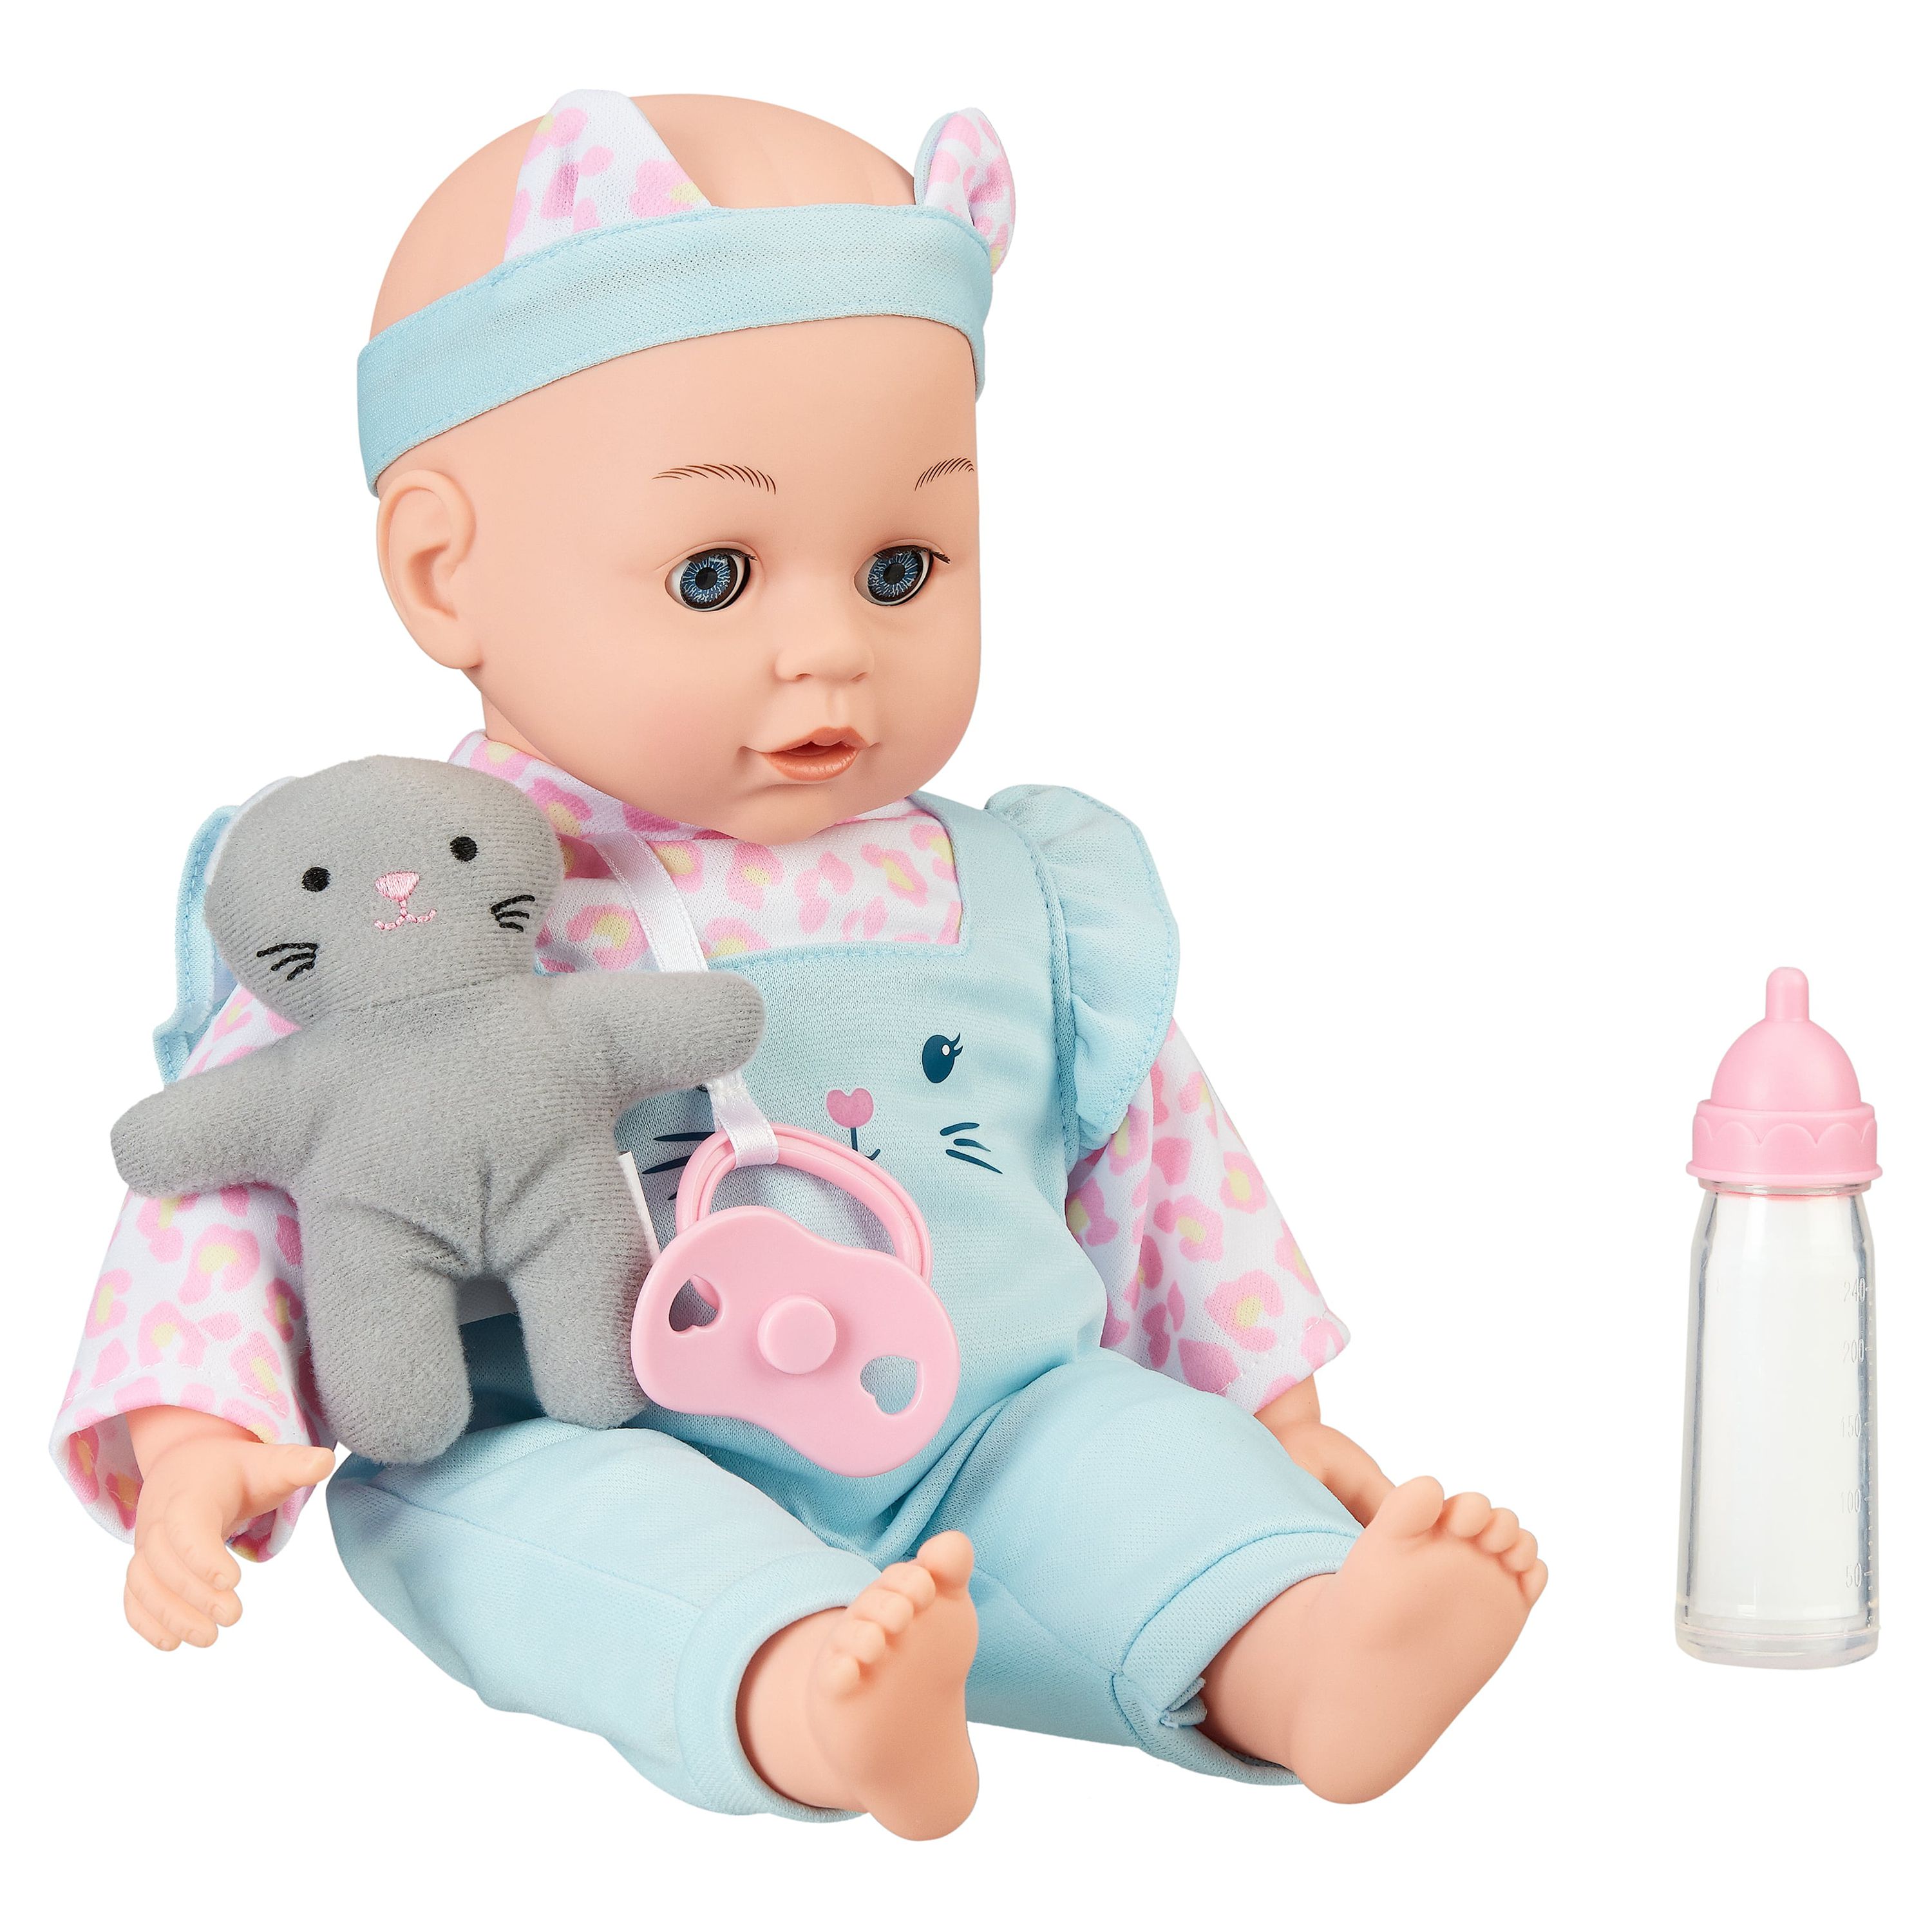 My Sweet Love Sweet Baby Doll Toy Set, 4 Pieces - image 1 of 5